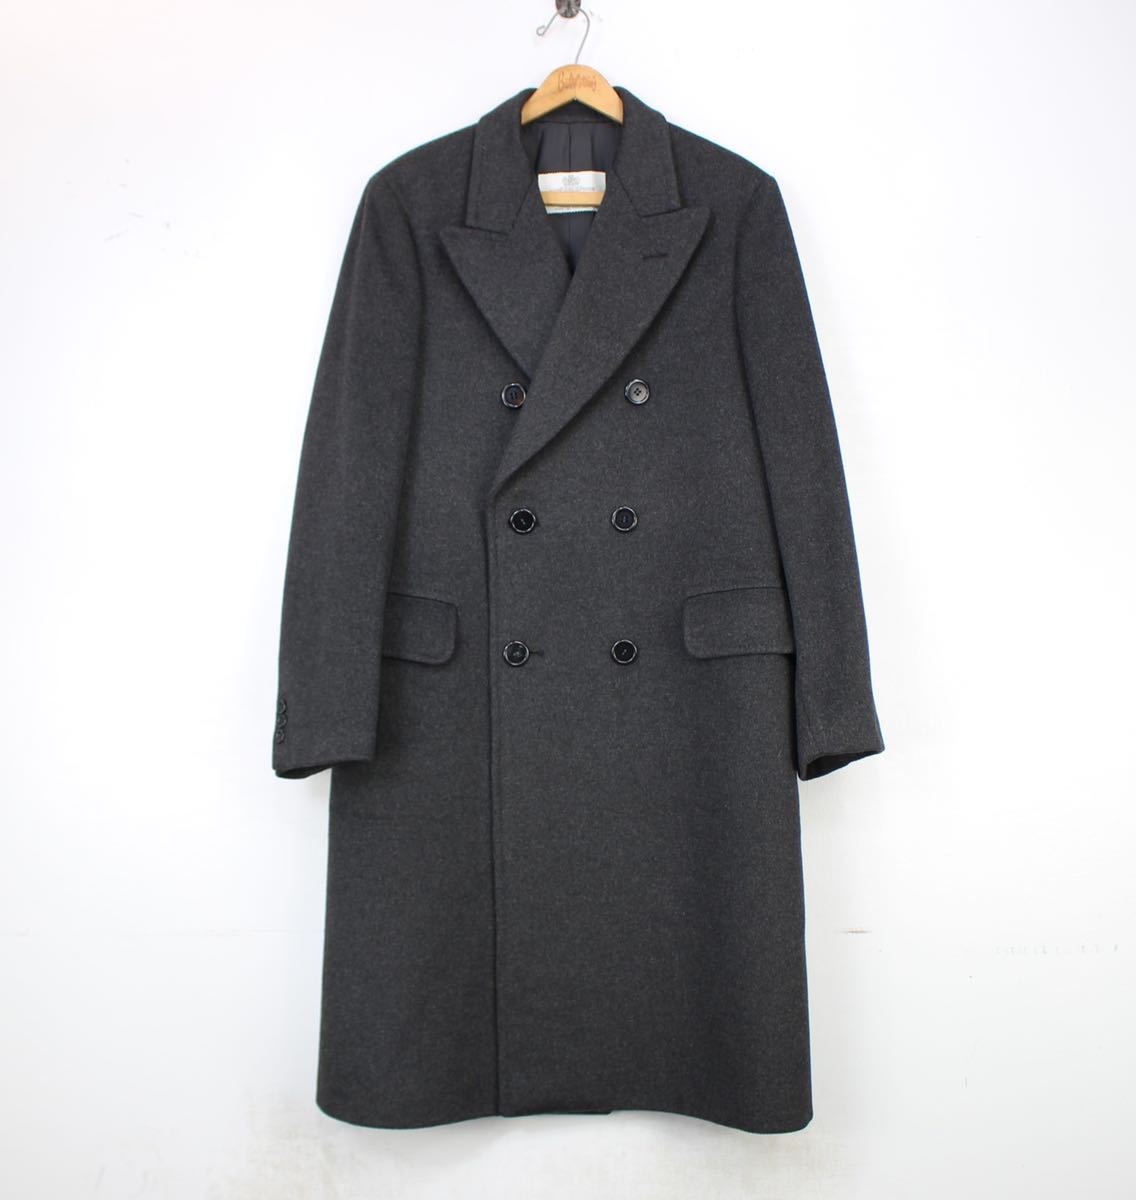 Aquascutum CASHMERE100% CHESTERFIELD COAT MADE IN ENGLAND/アクアスキュータムカシミヤ100%チェスターフィールドコート